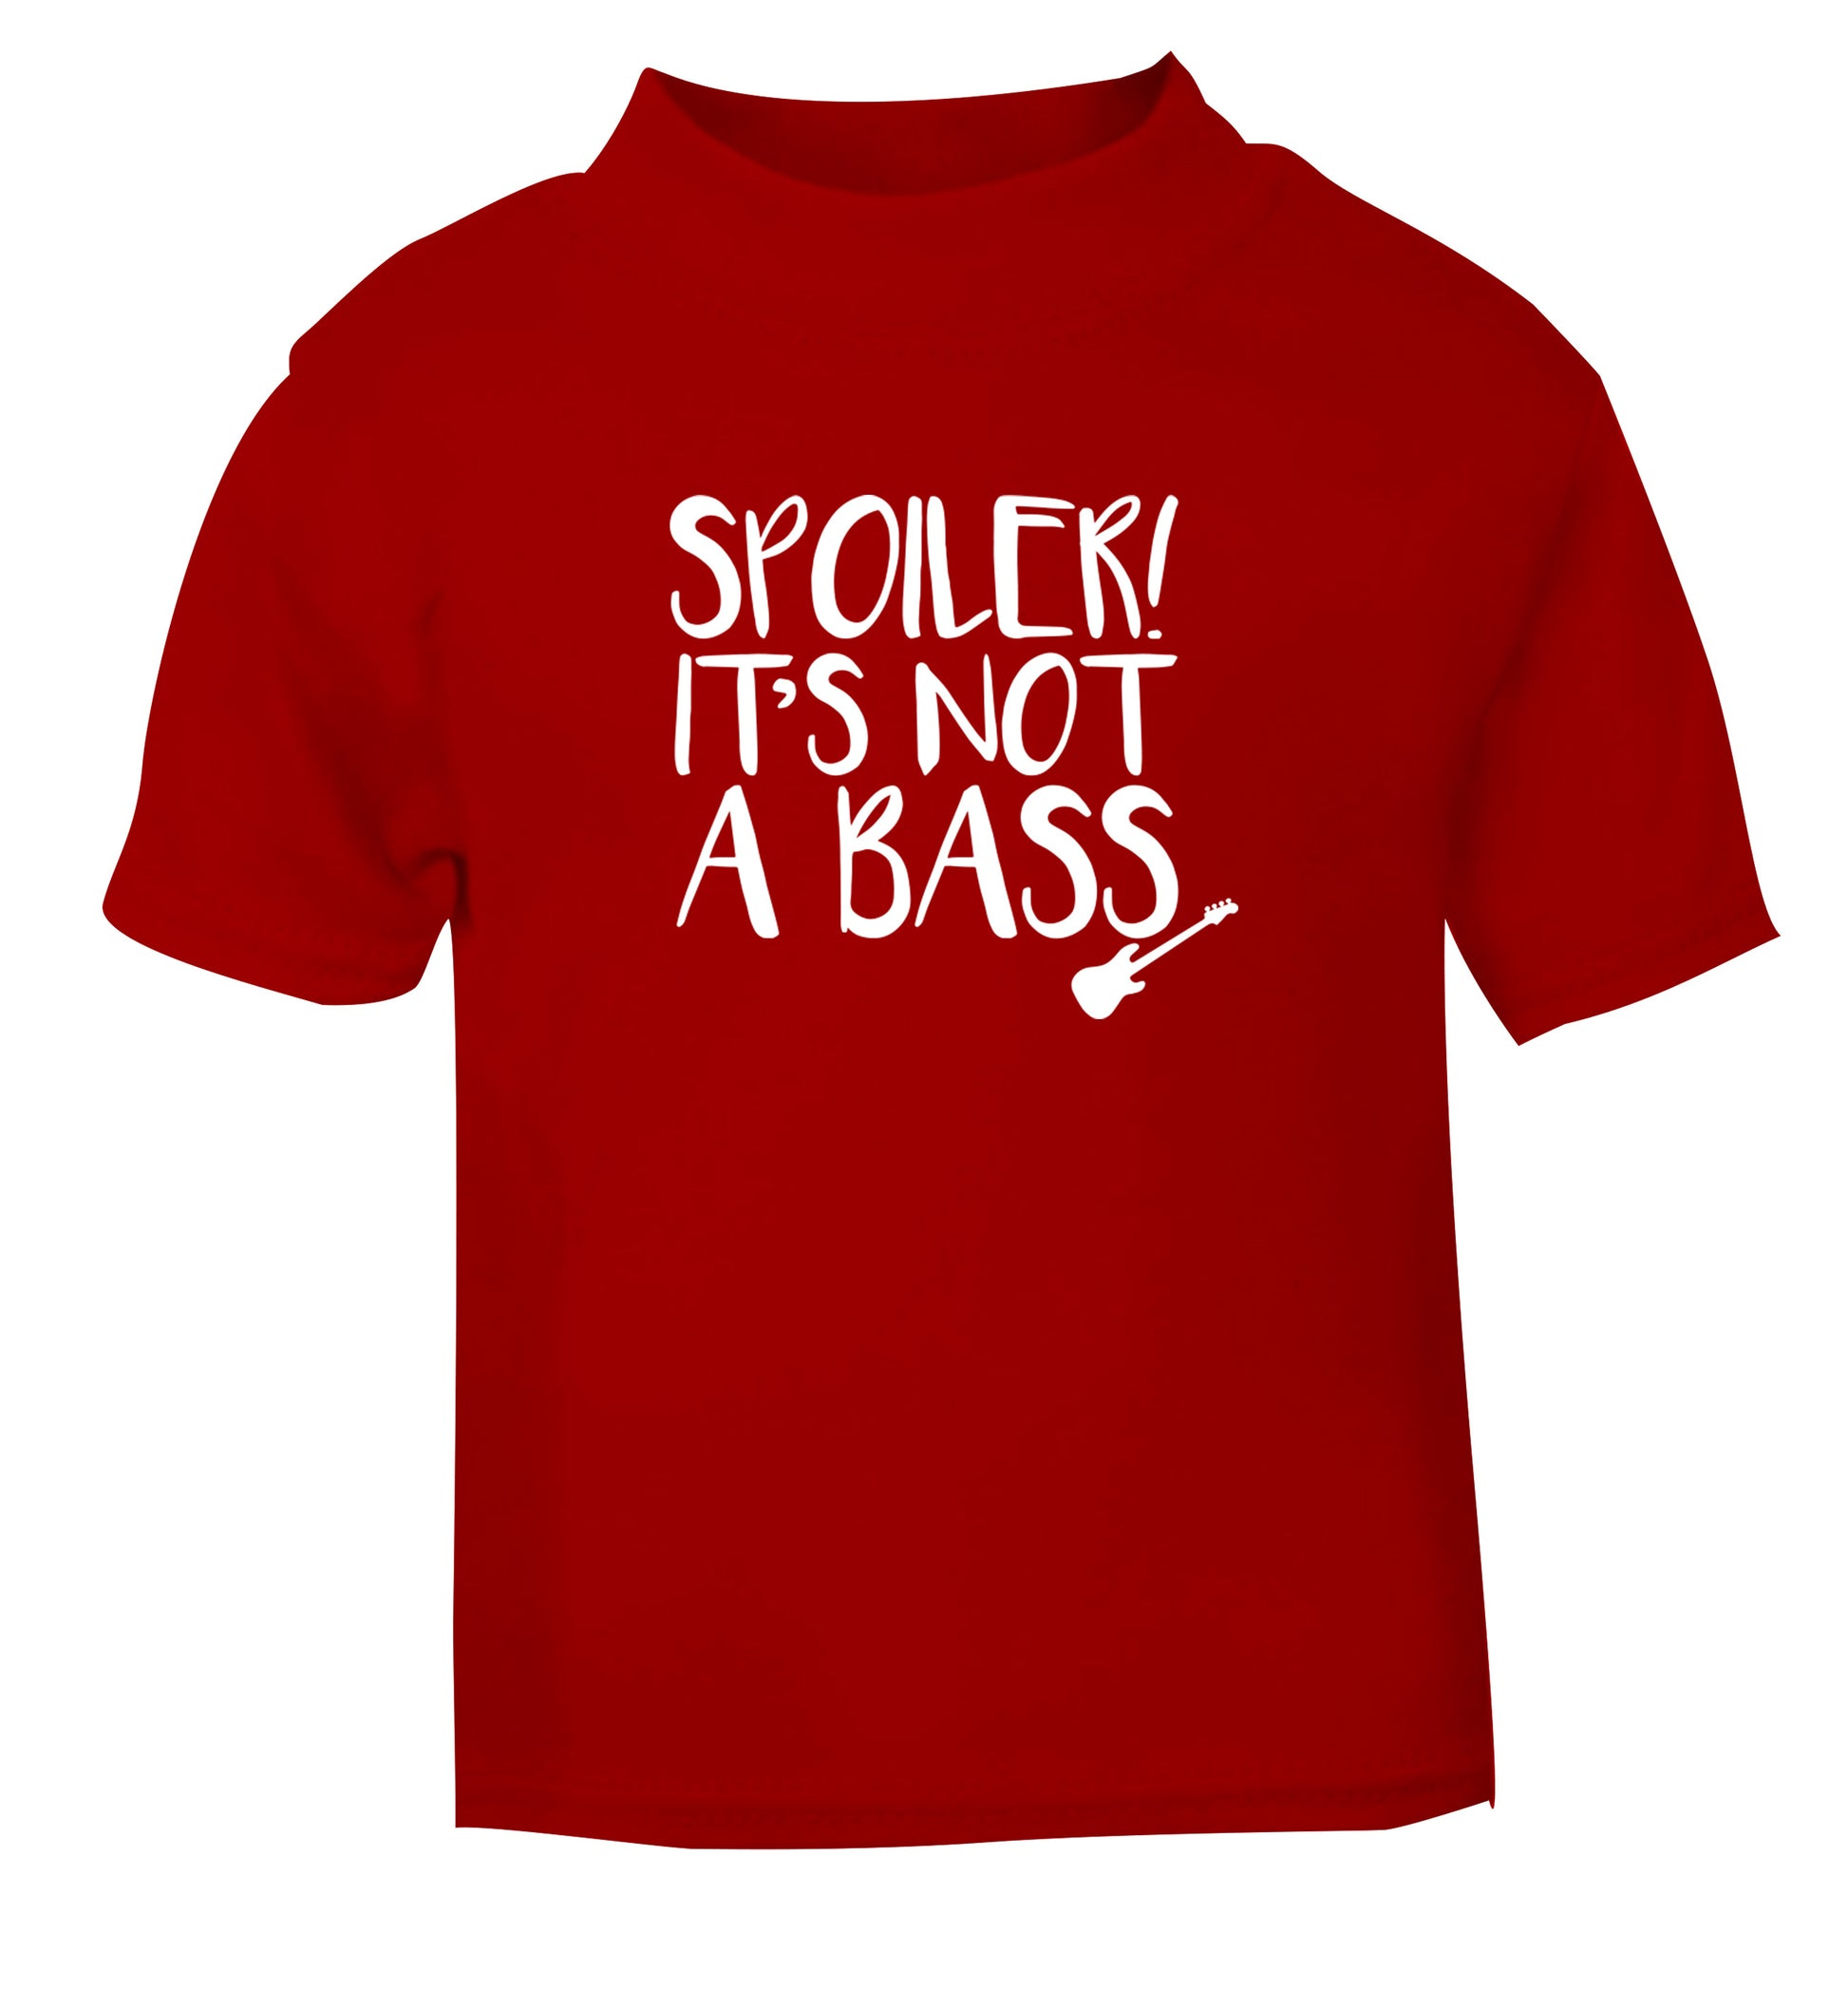 Spoiler it's not a bass red Baby Toddler Tshirt 2 Years